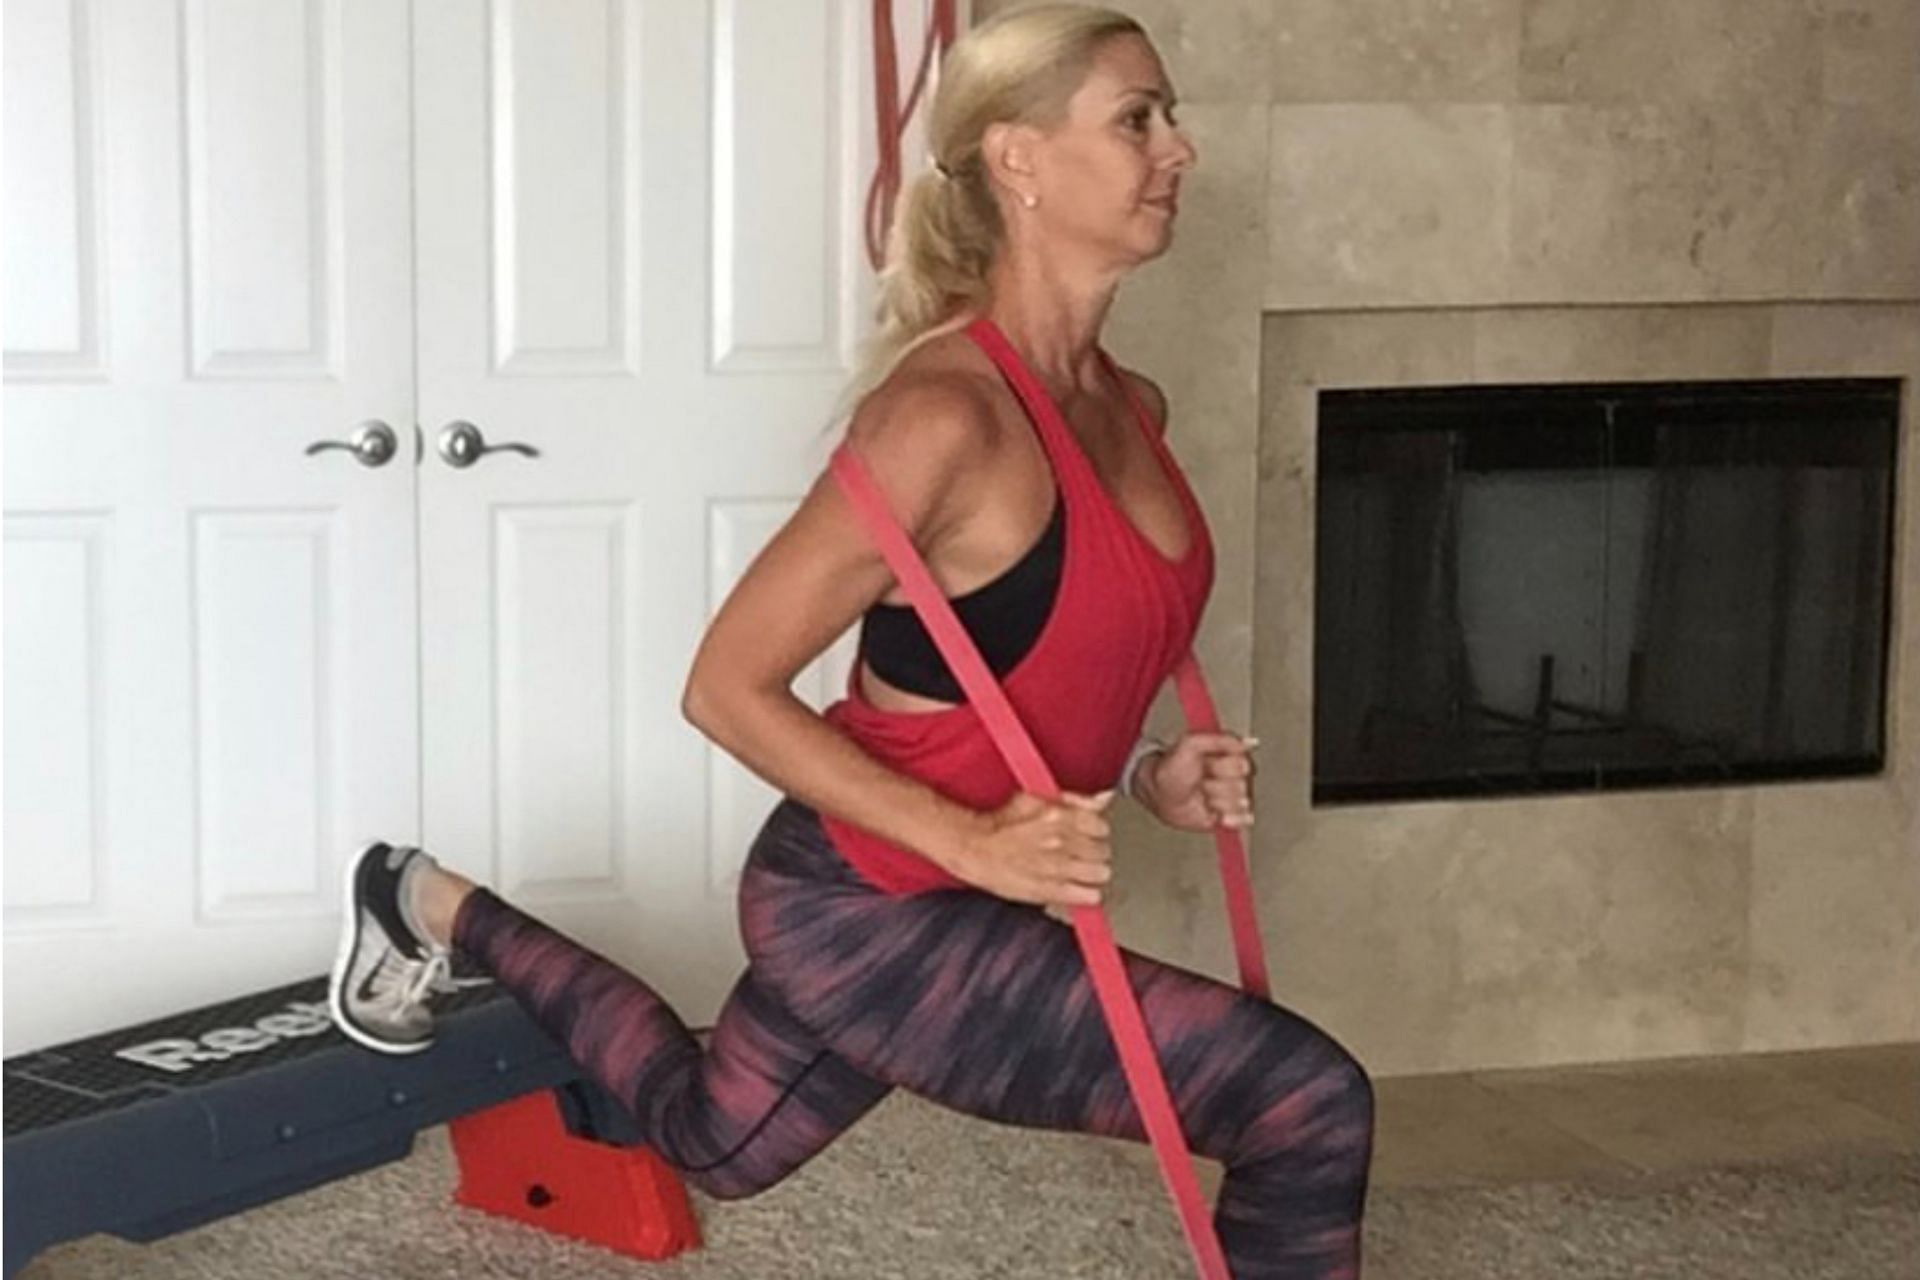 Resistance band Bulgarian squat can be done at home. (Photo via Instagram/kerrilynnwilson)